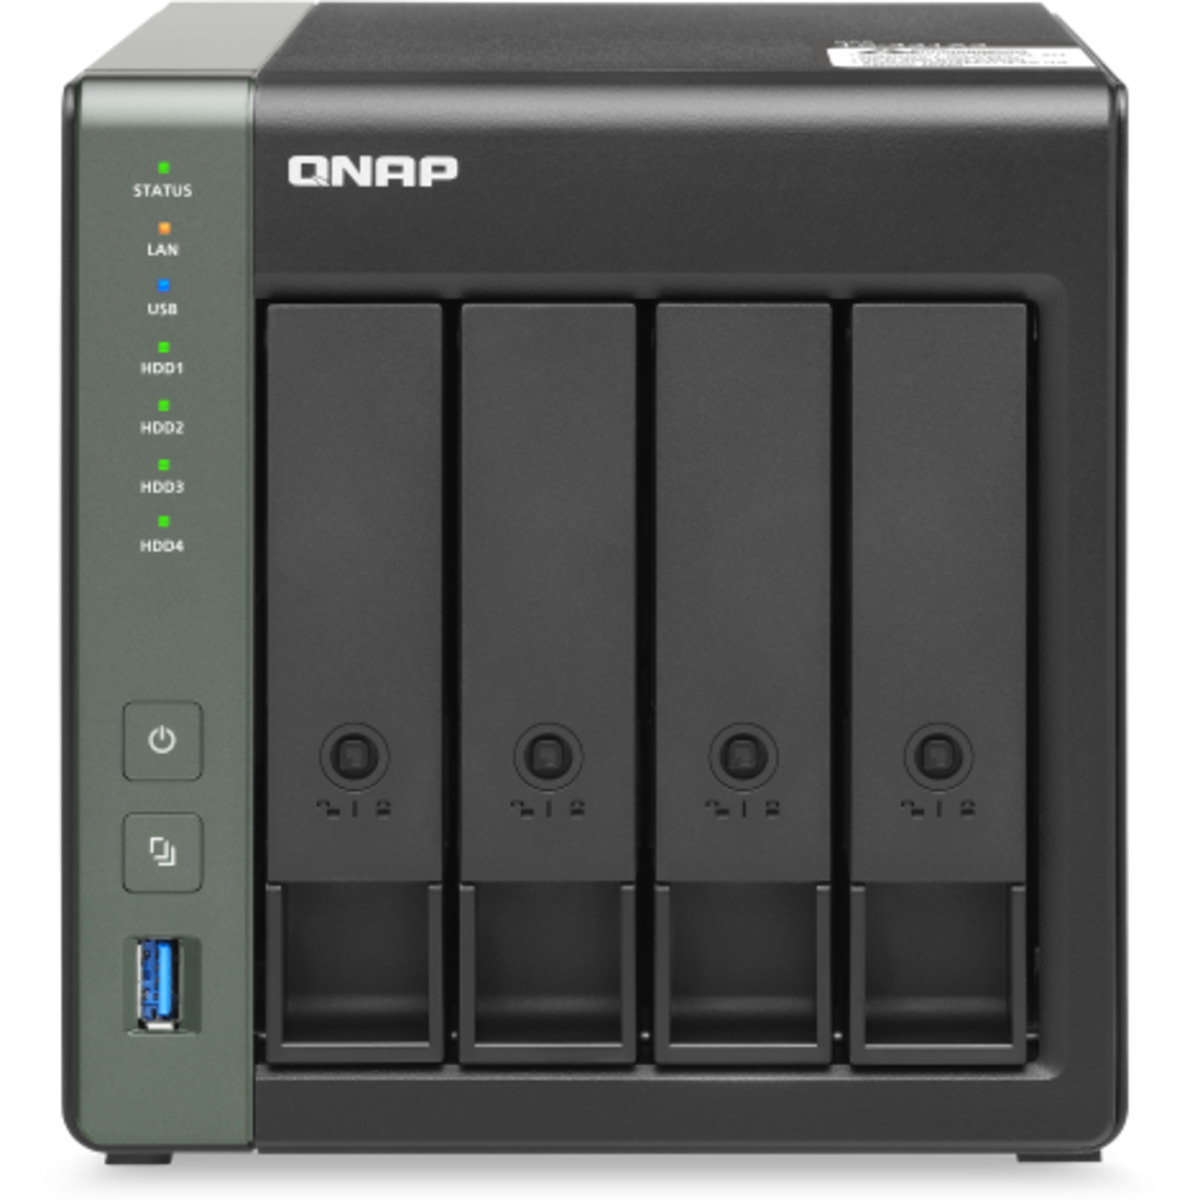 QNAP TS-431X3 48tb 4-Bay Desktop Multimedia / Power User / Business NAS - Network Attached Storage Device 3x16tb Western Digital Red Pro WD161KFGX 3.5 7200rpm SATA 6Gb/s HDD NAS Class Drives Installed - Burn-In Tested - FREE RAM UPGRADE TS-431X3